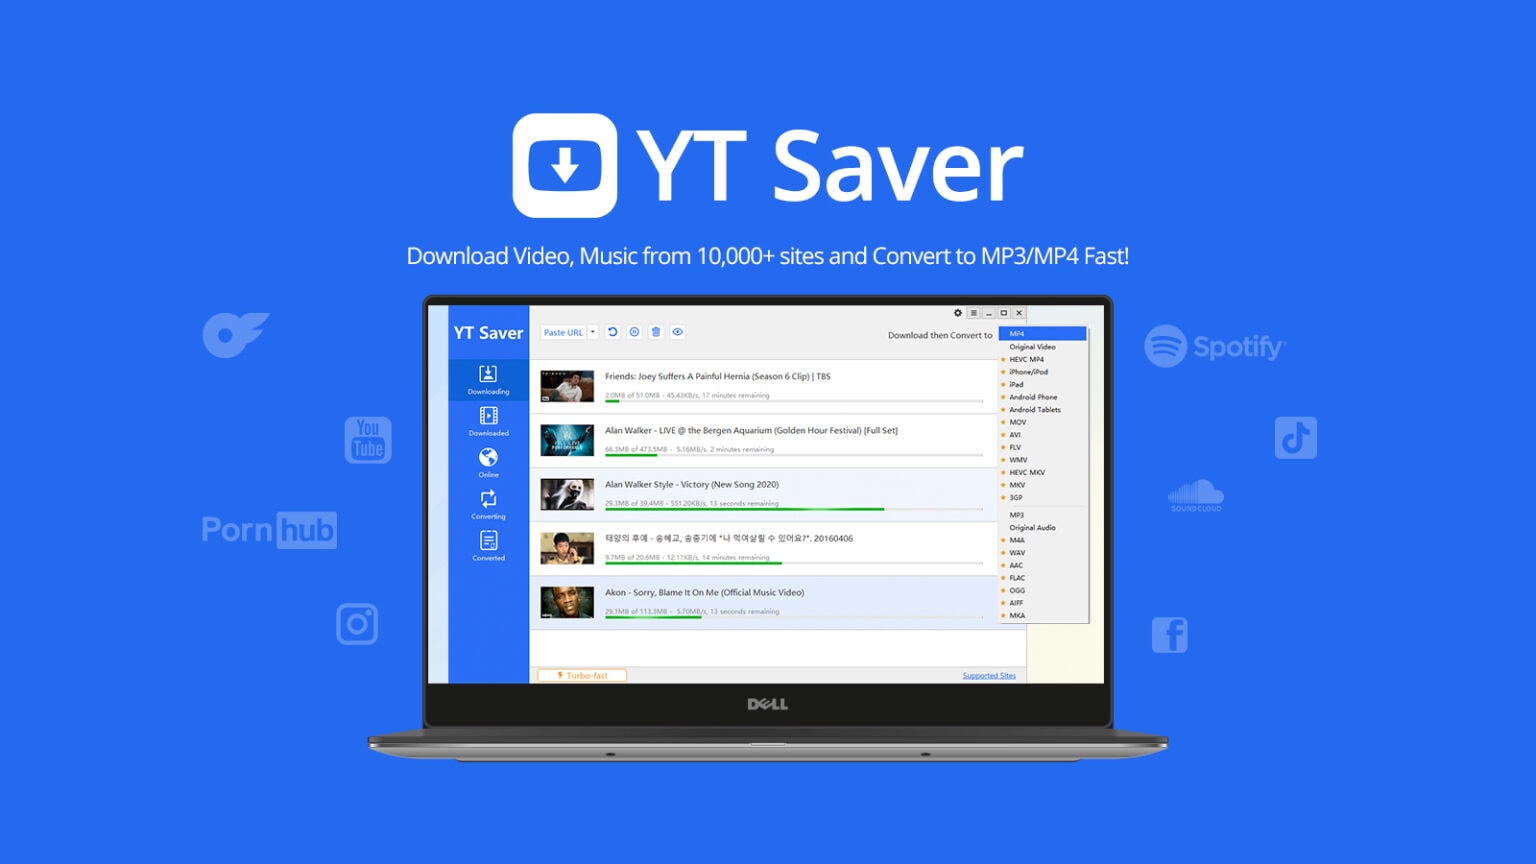 YT Saver can help you download videos from YouTube and other sites.